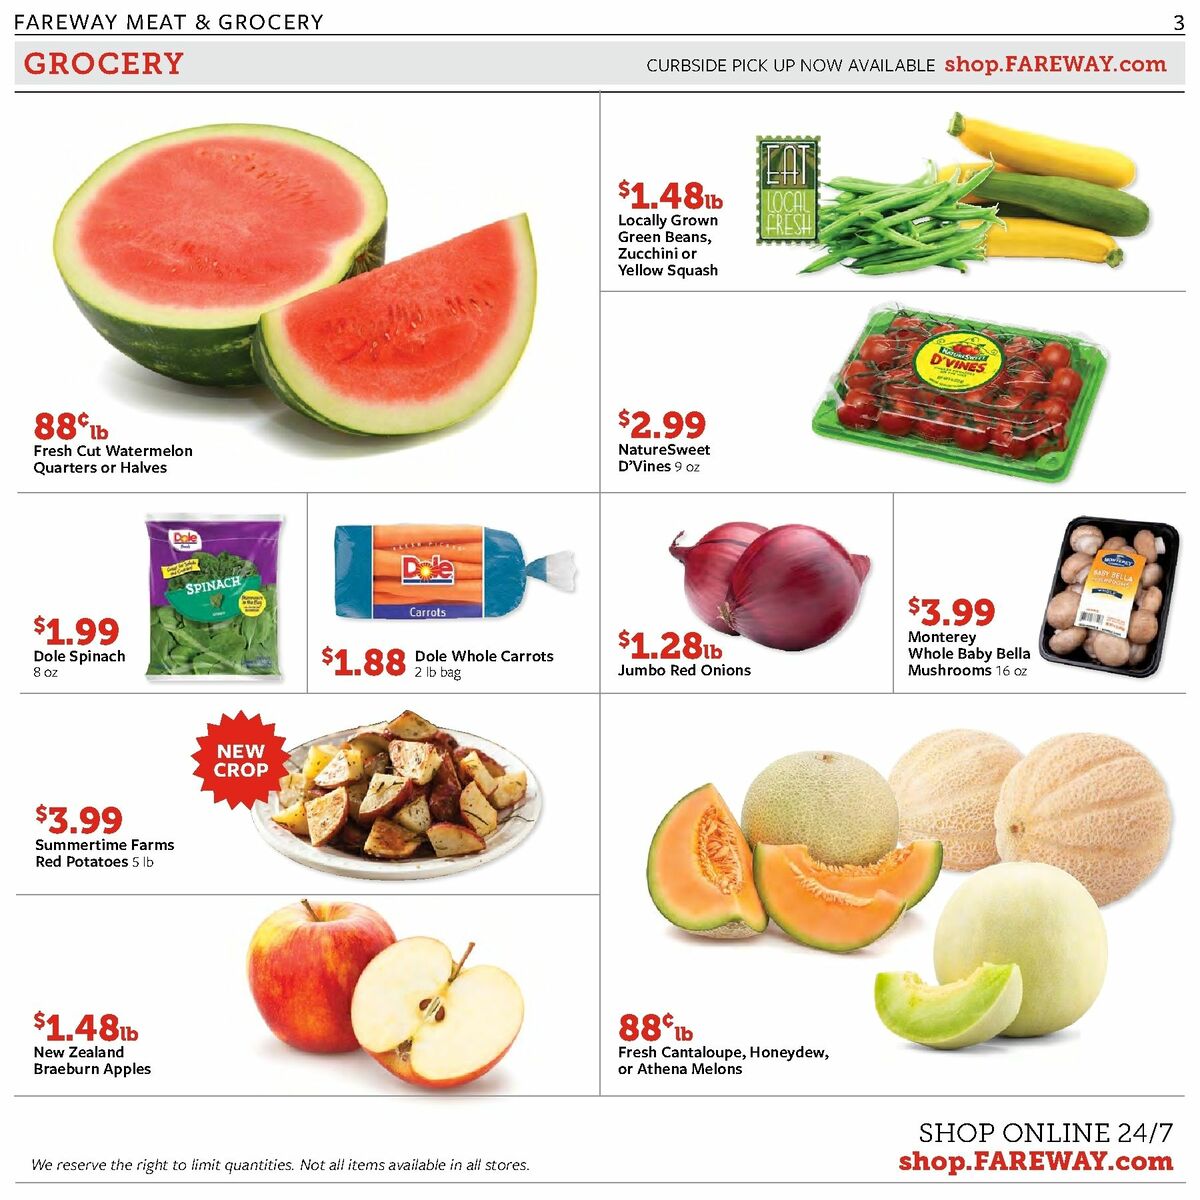 Fareway Weekly Ad from August 14